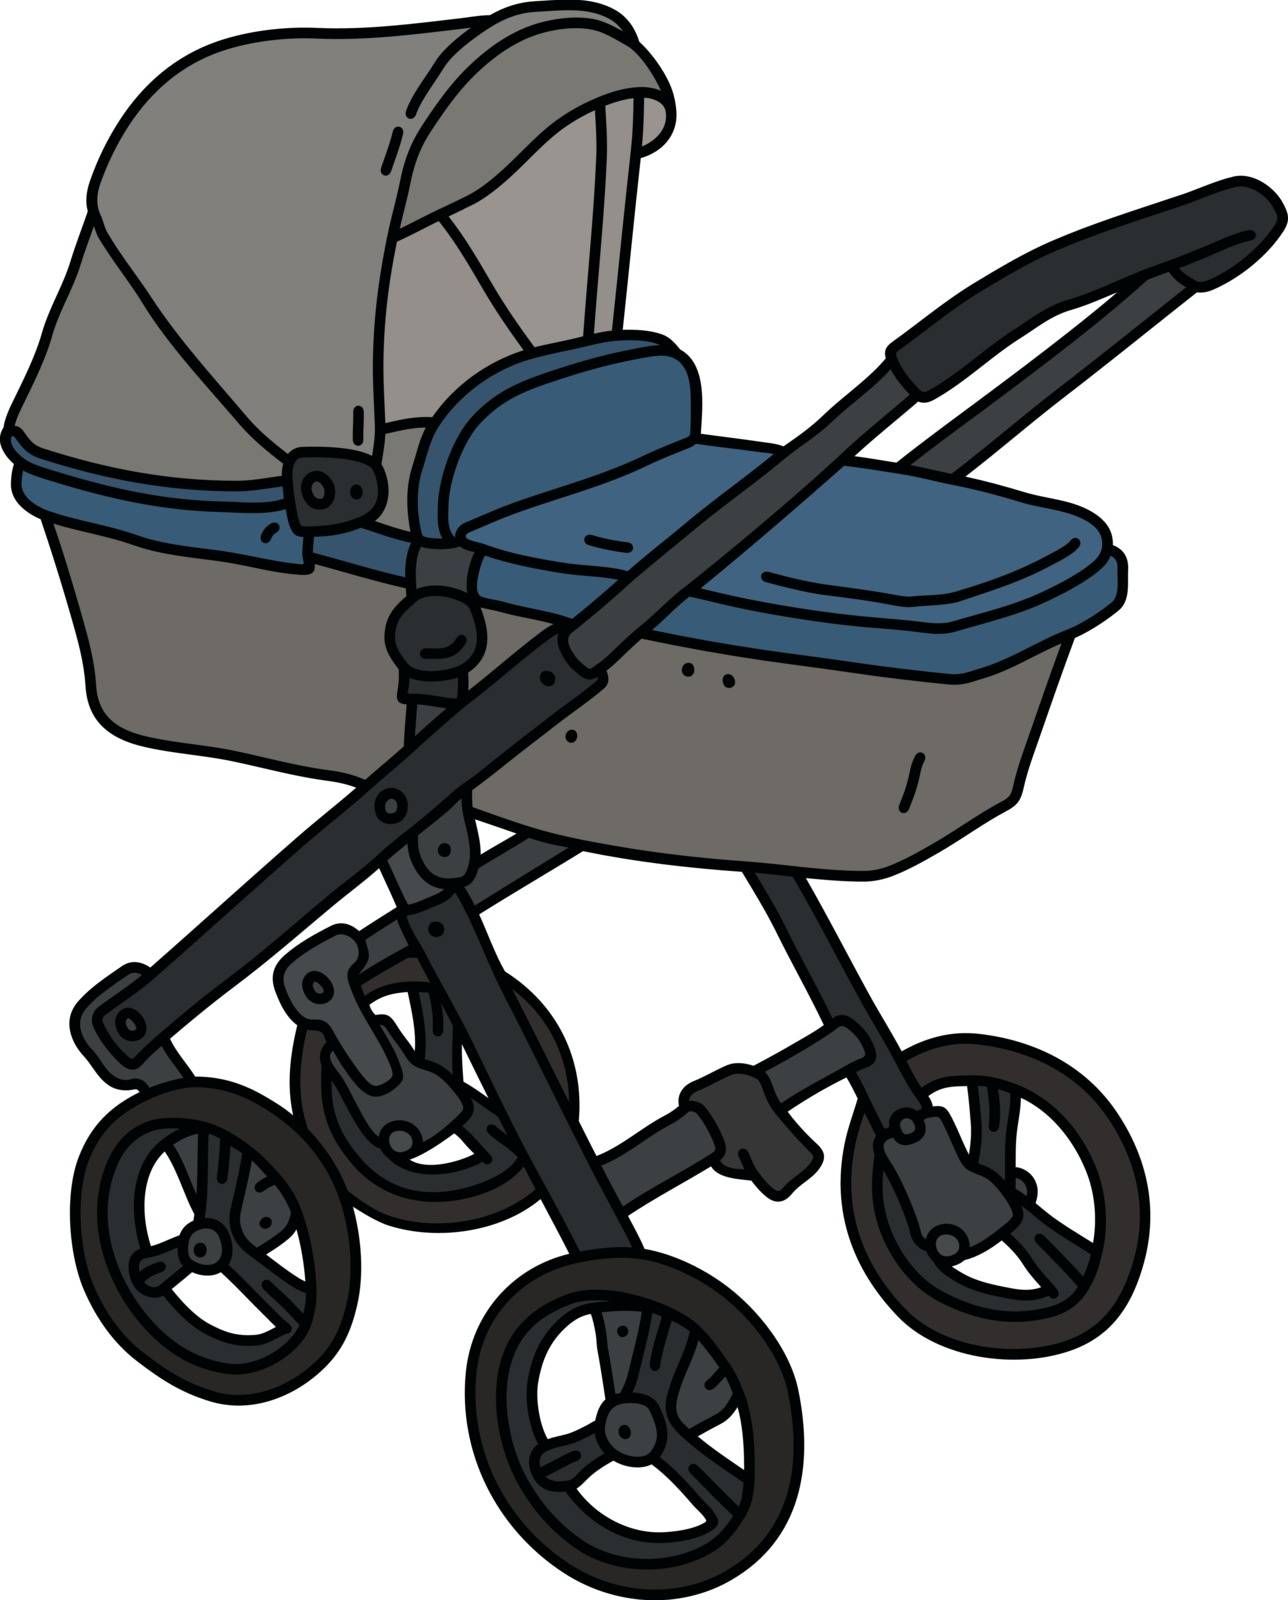 The vectorized hand drawing of a blue and gray stroller